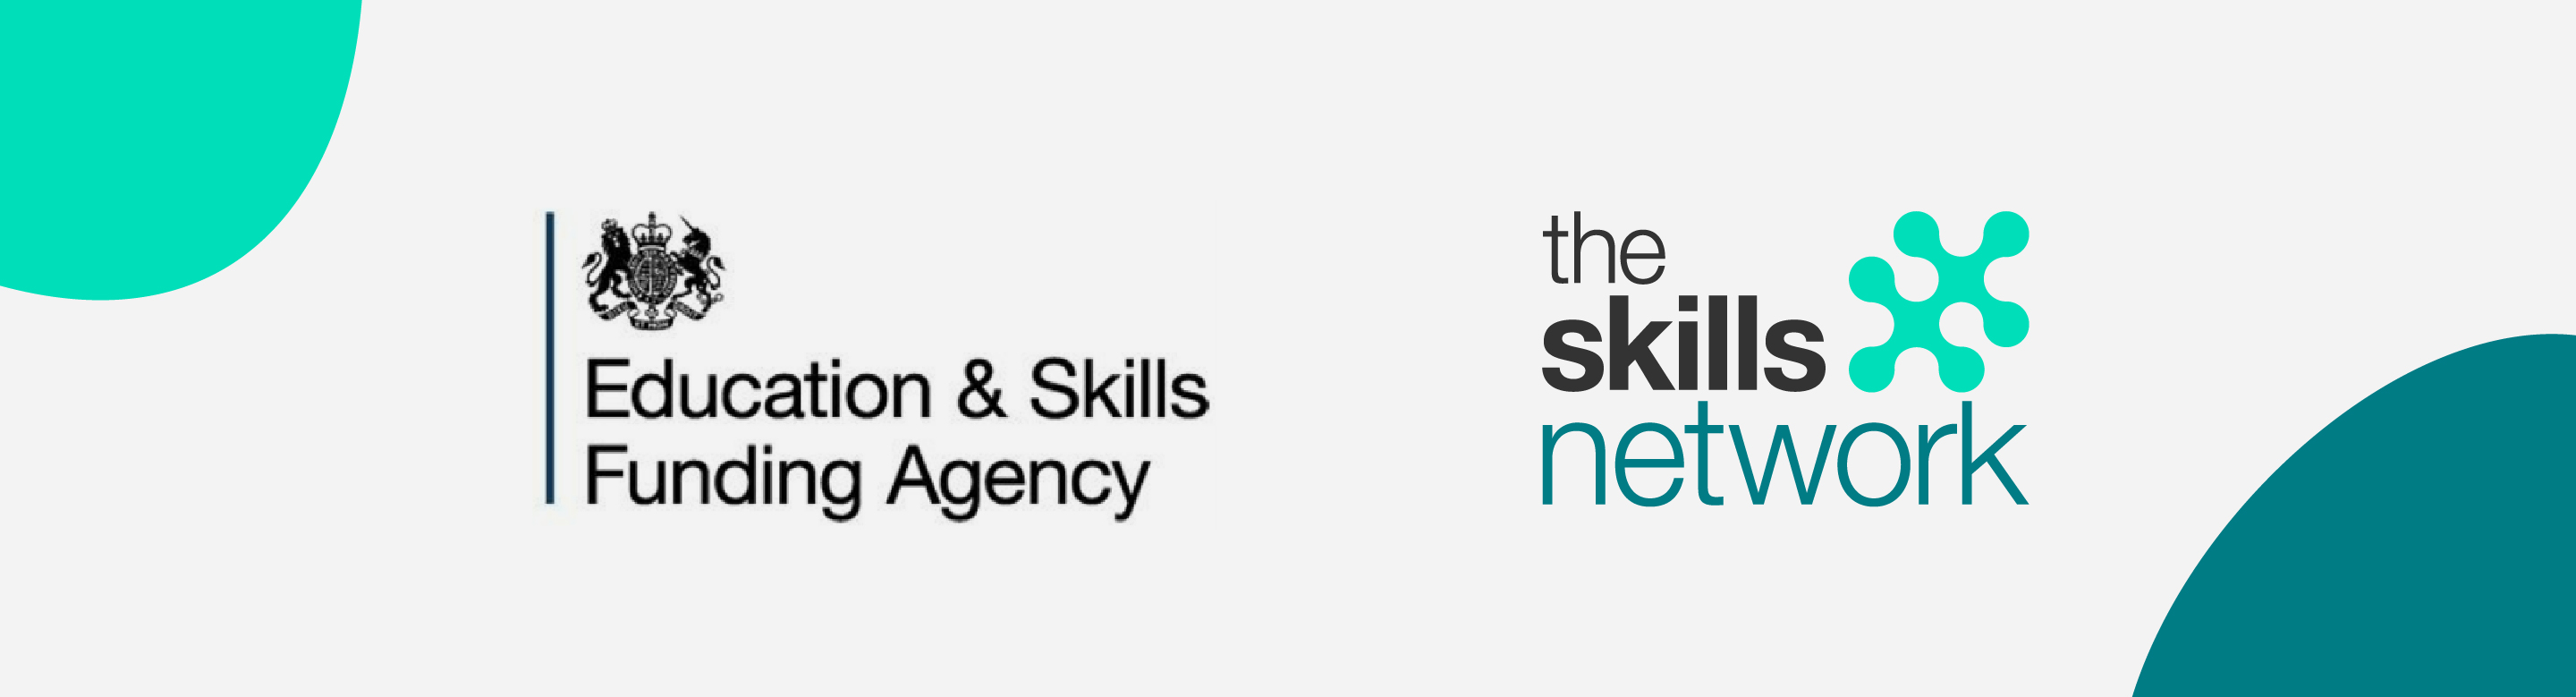 ESFA and The Skills Network